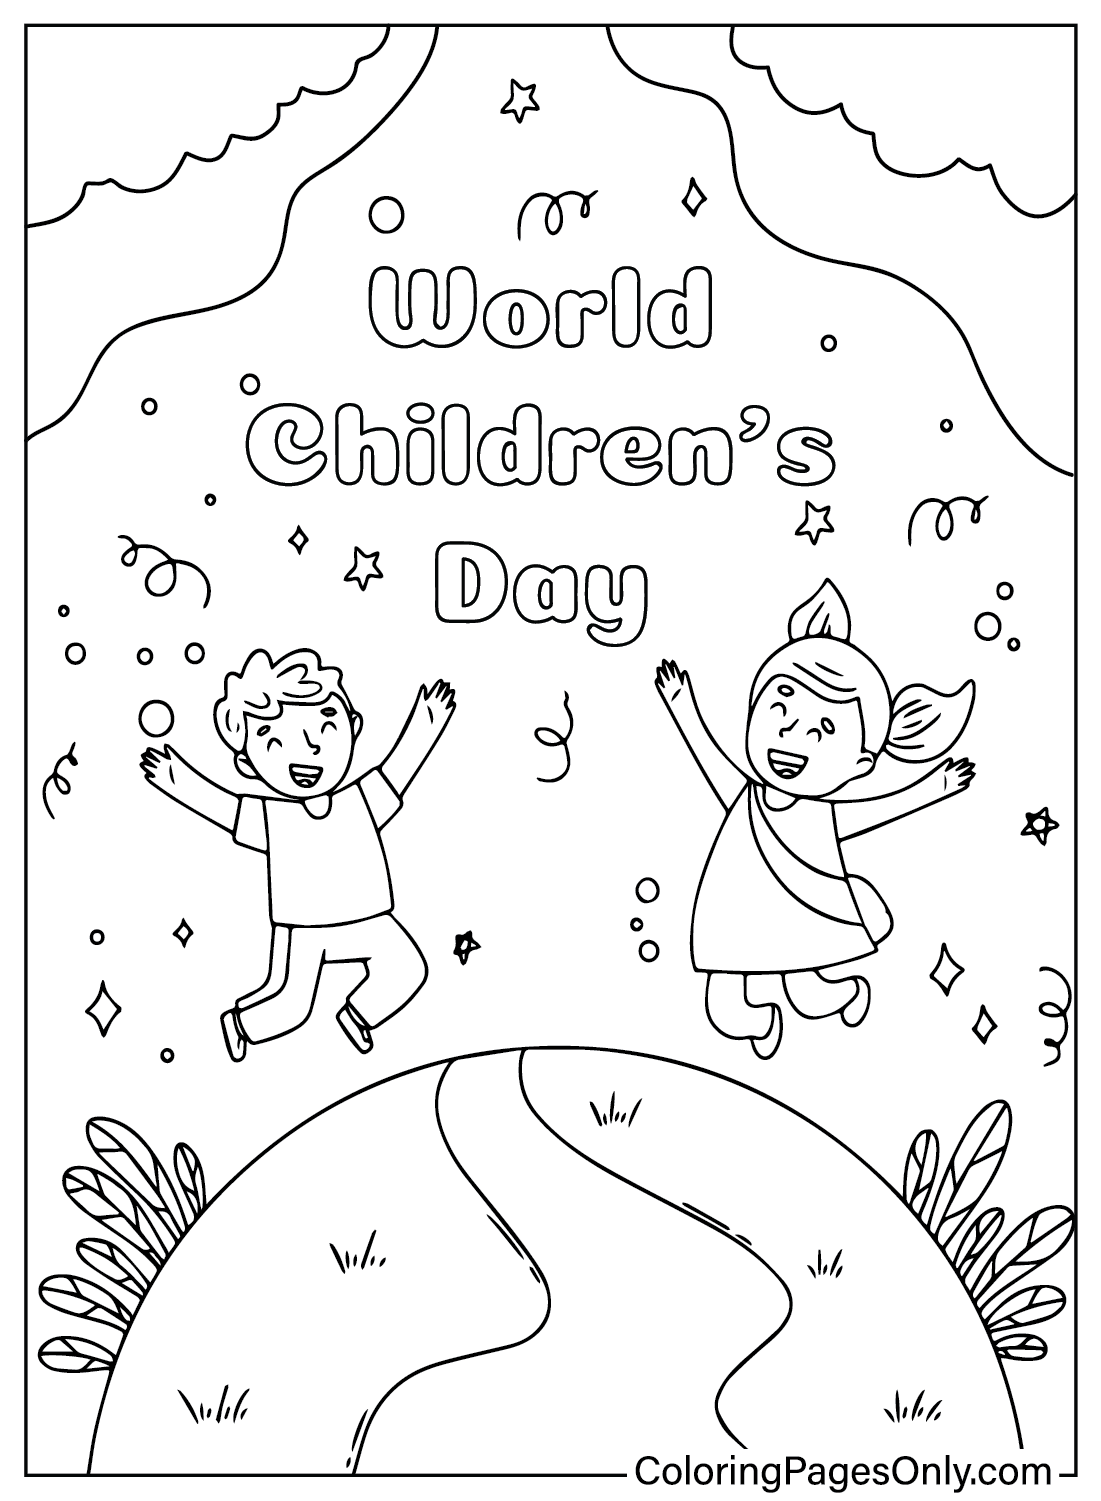 Coloring Page World Children’s Day